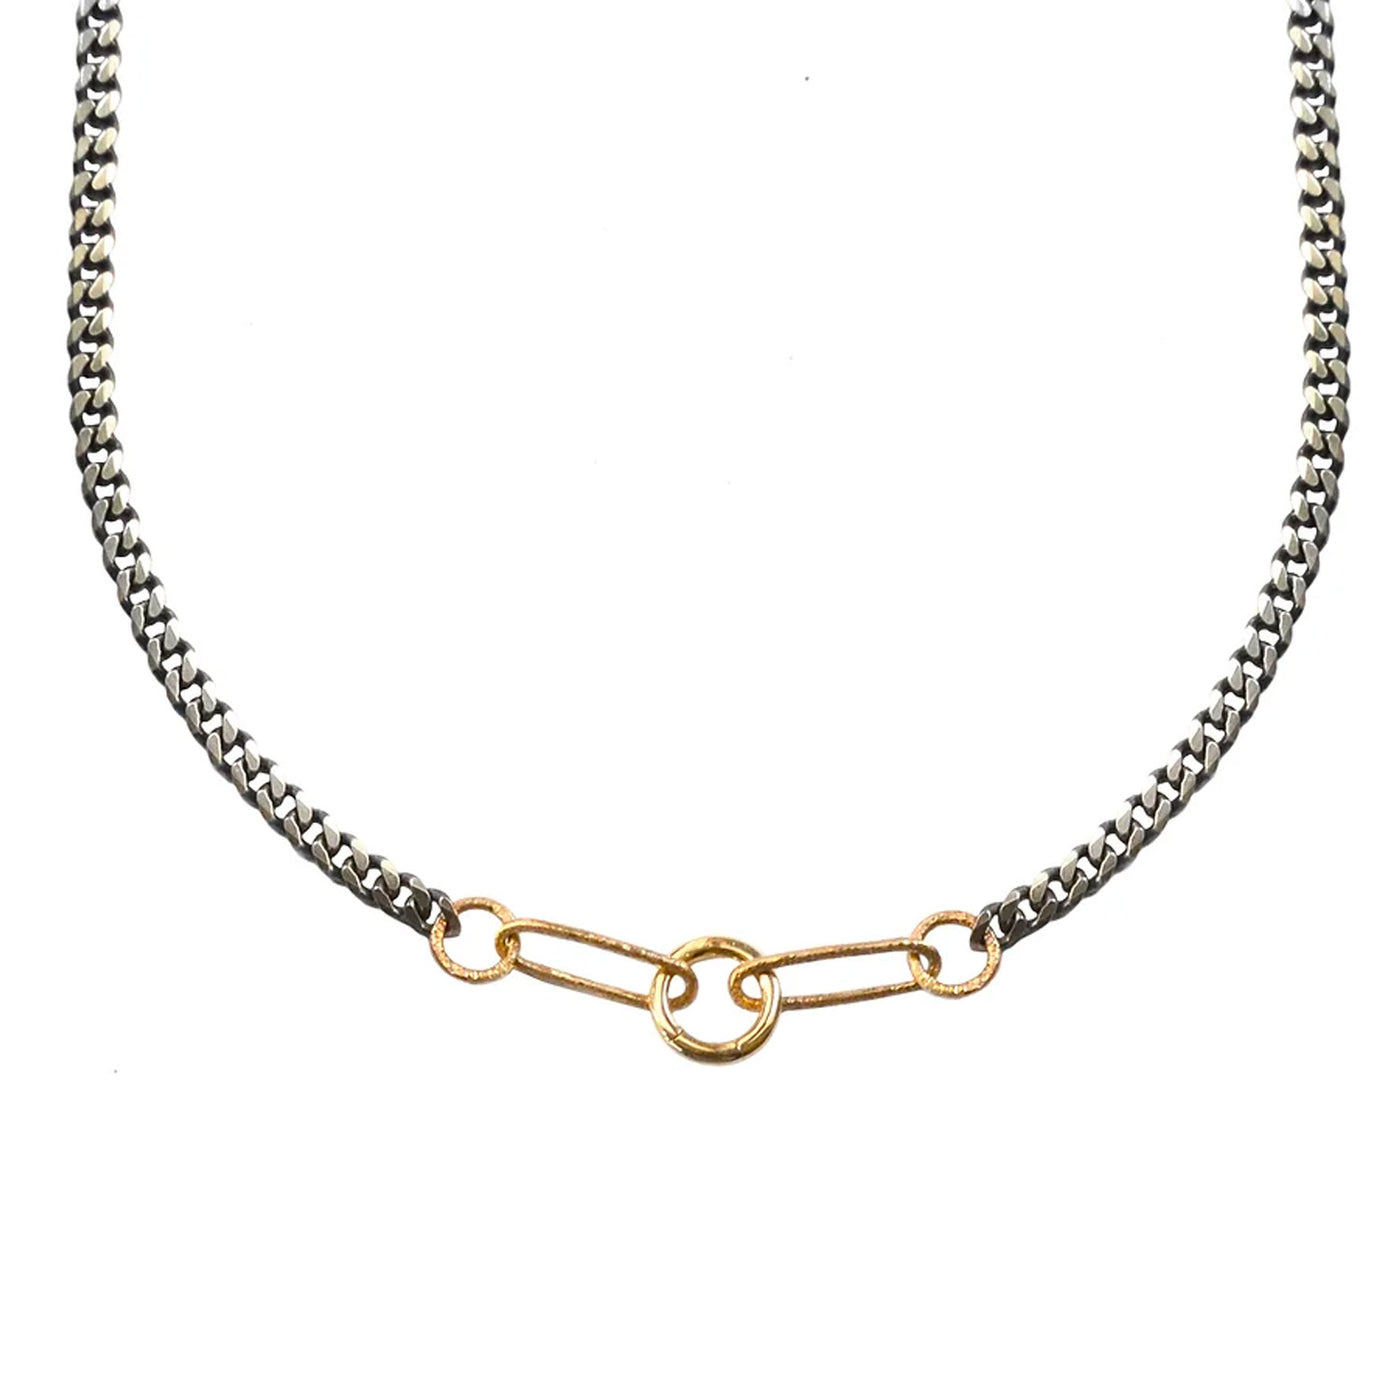 Five Link Charm Holder Chain Necklace